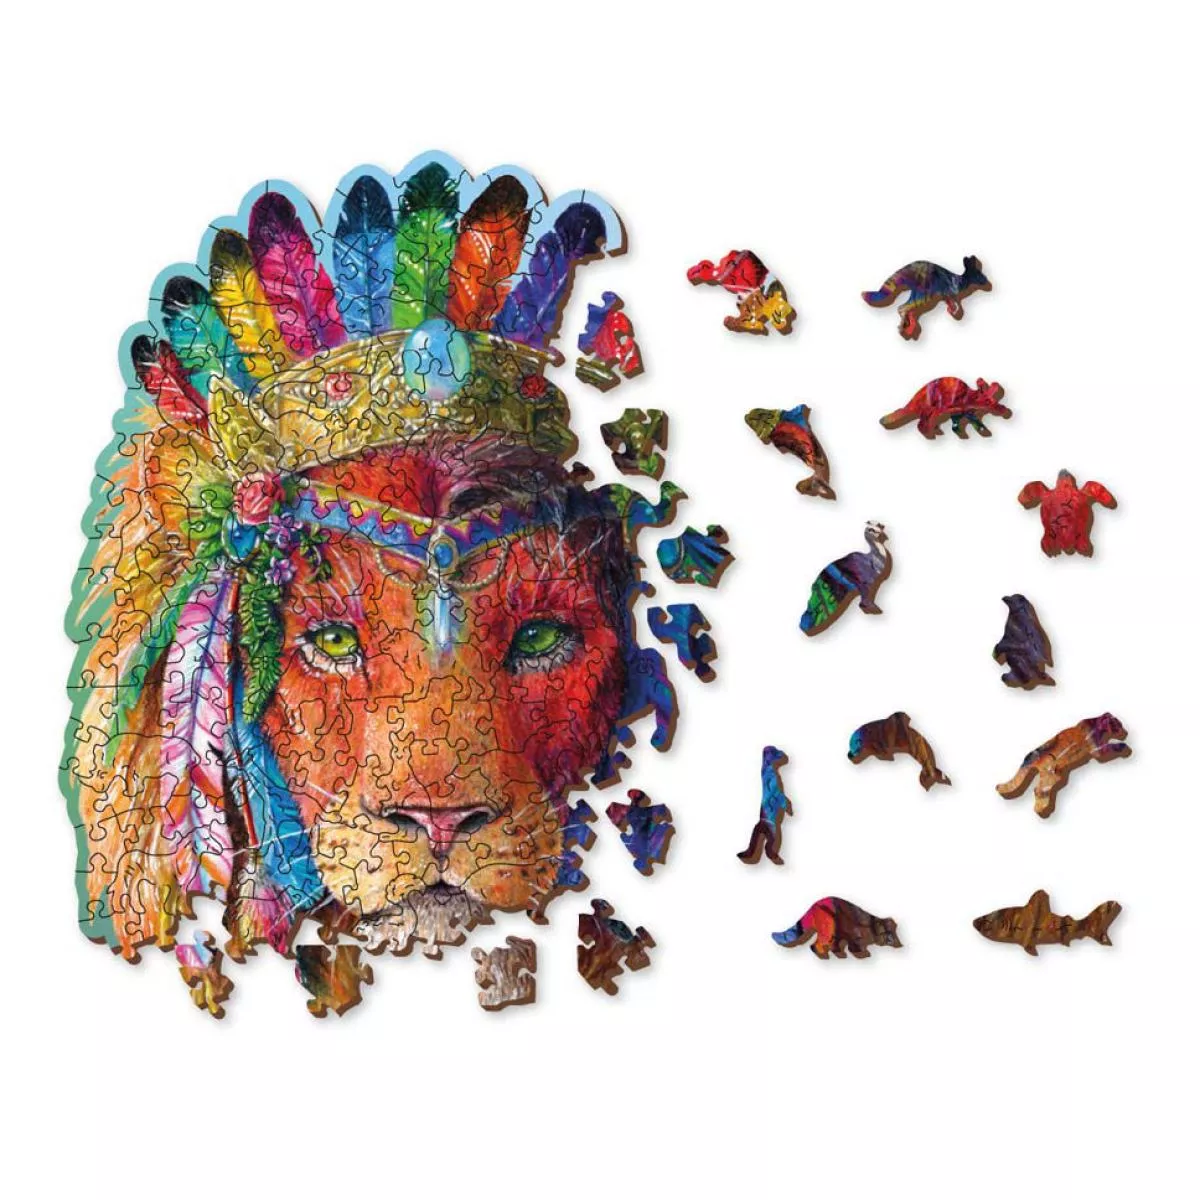 Colorful Puzzle "Mystic Lion" made of Wood – 250 parts, 40 shapes